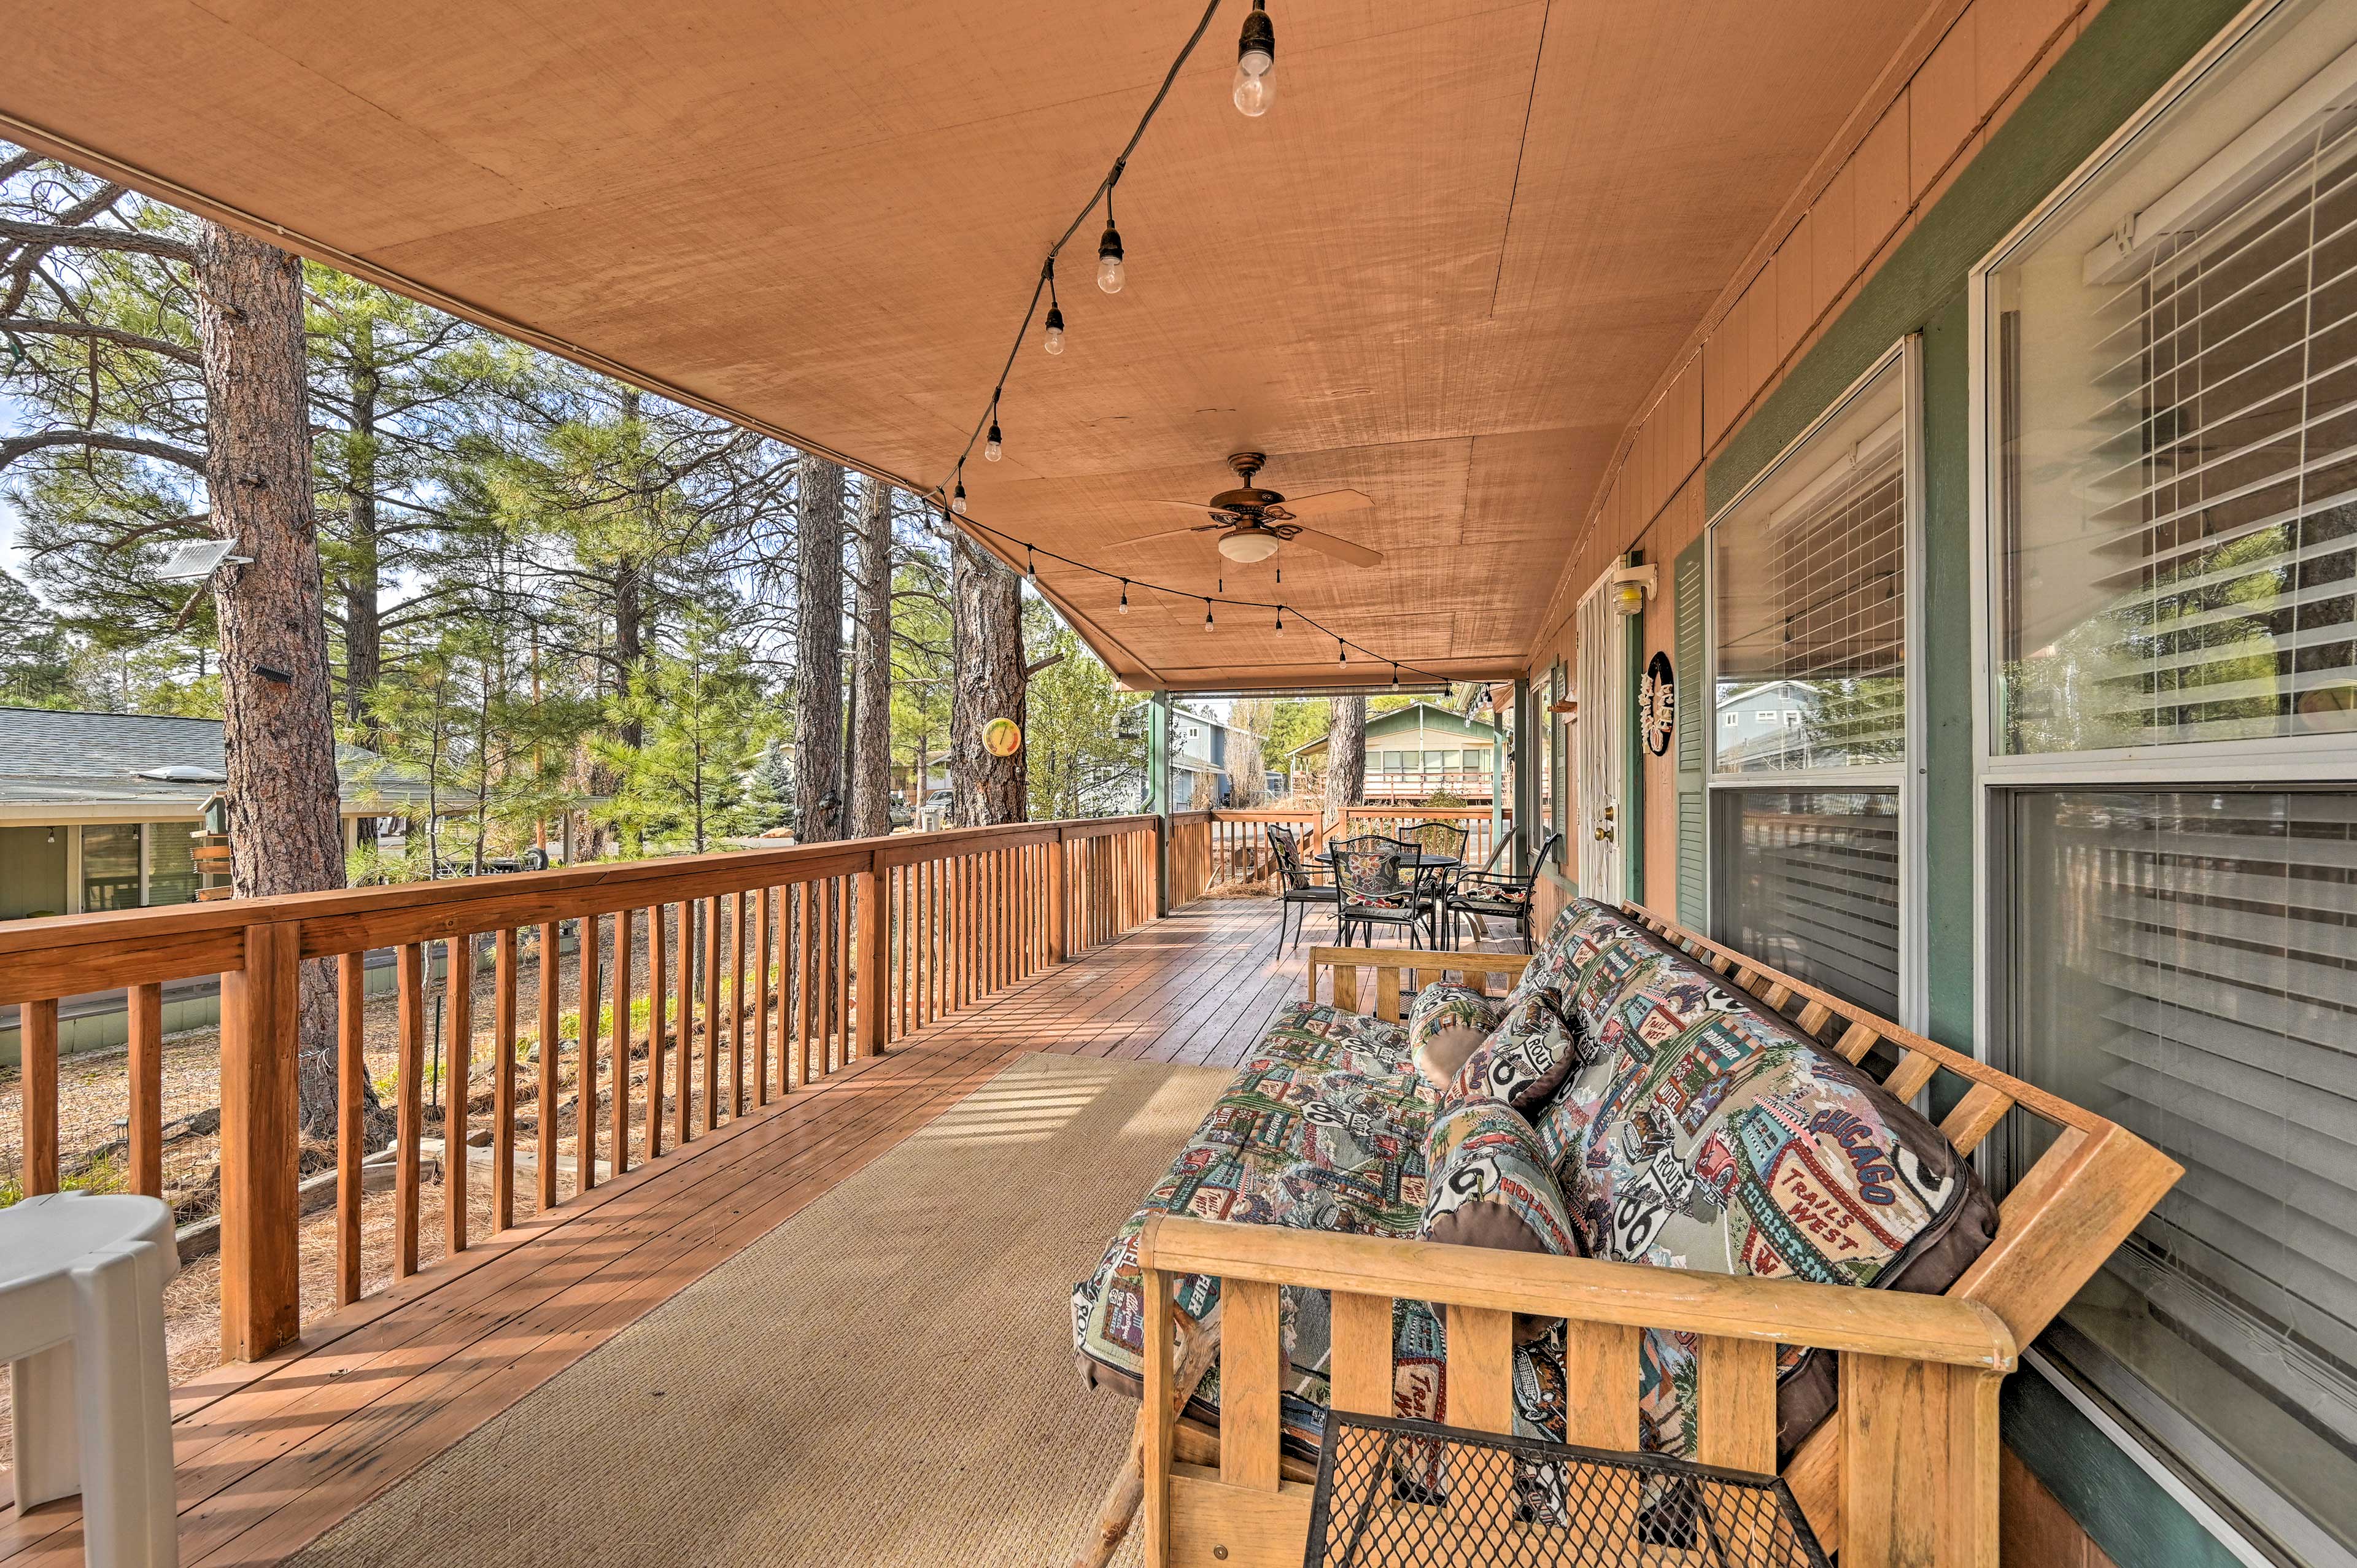 Wraparound Deck | Outdoor Seating | Gas Grill (Propane Provided)